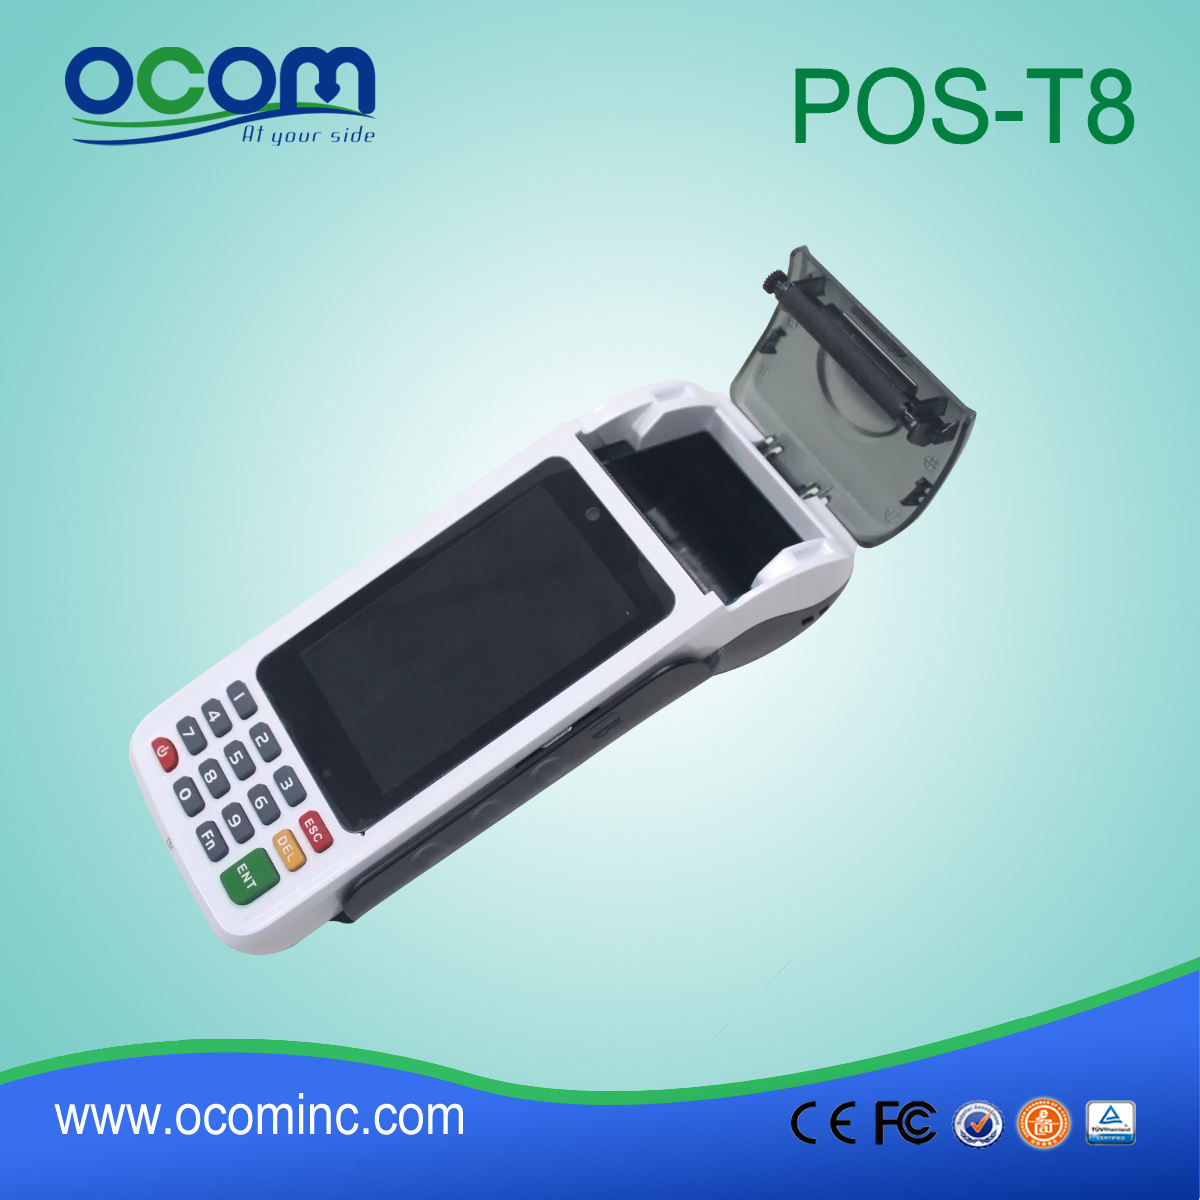 Handheld Pos terminale Android in Pos System (POS-T8)